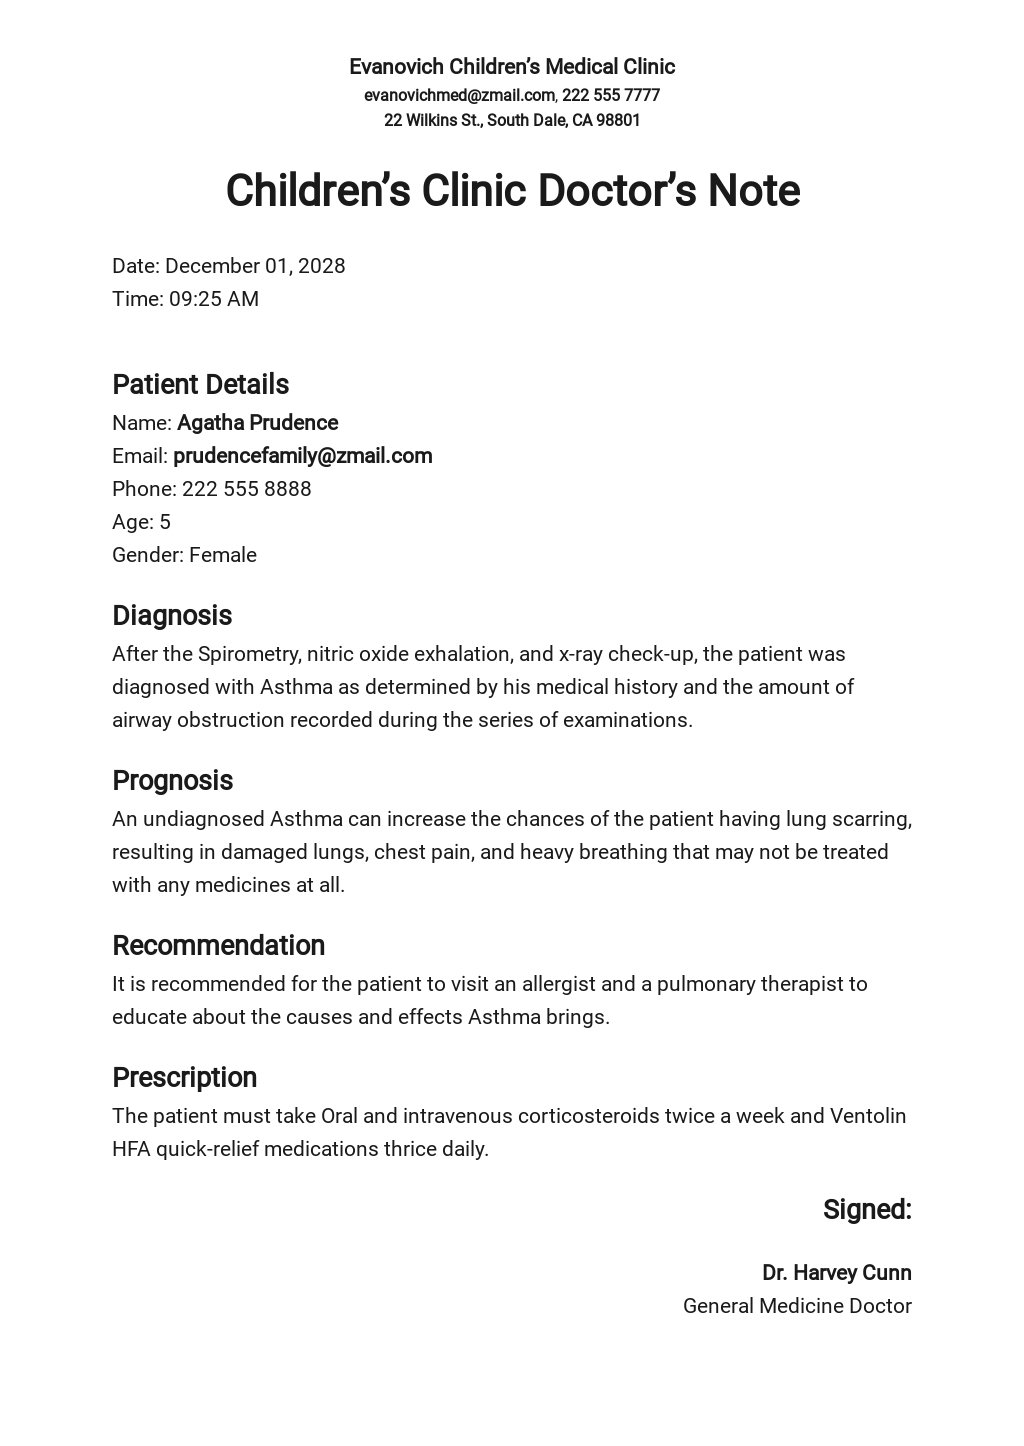 Free Doctor Note Templates 15  Download in PDF Template net